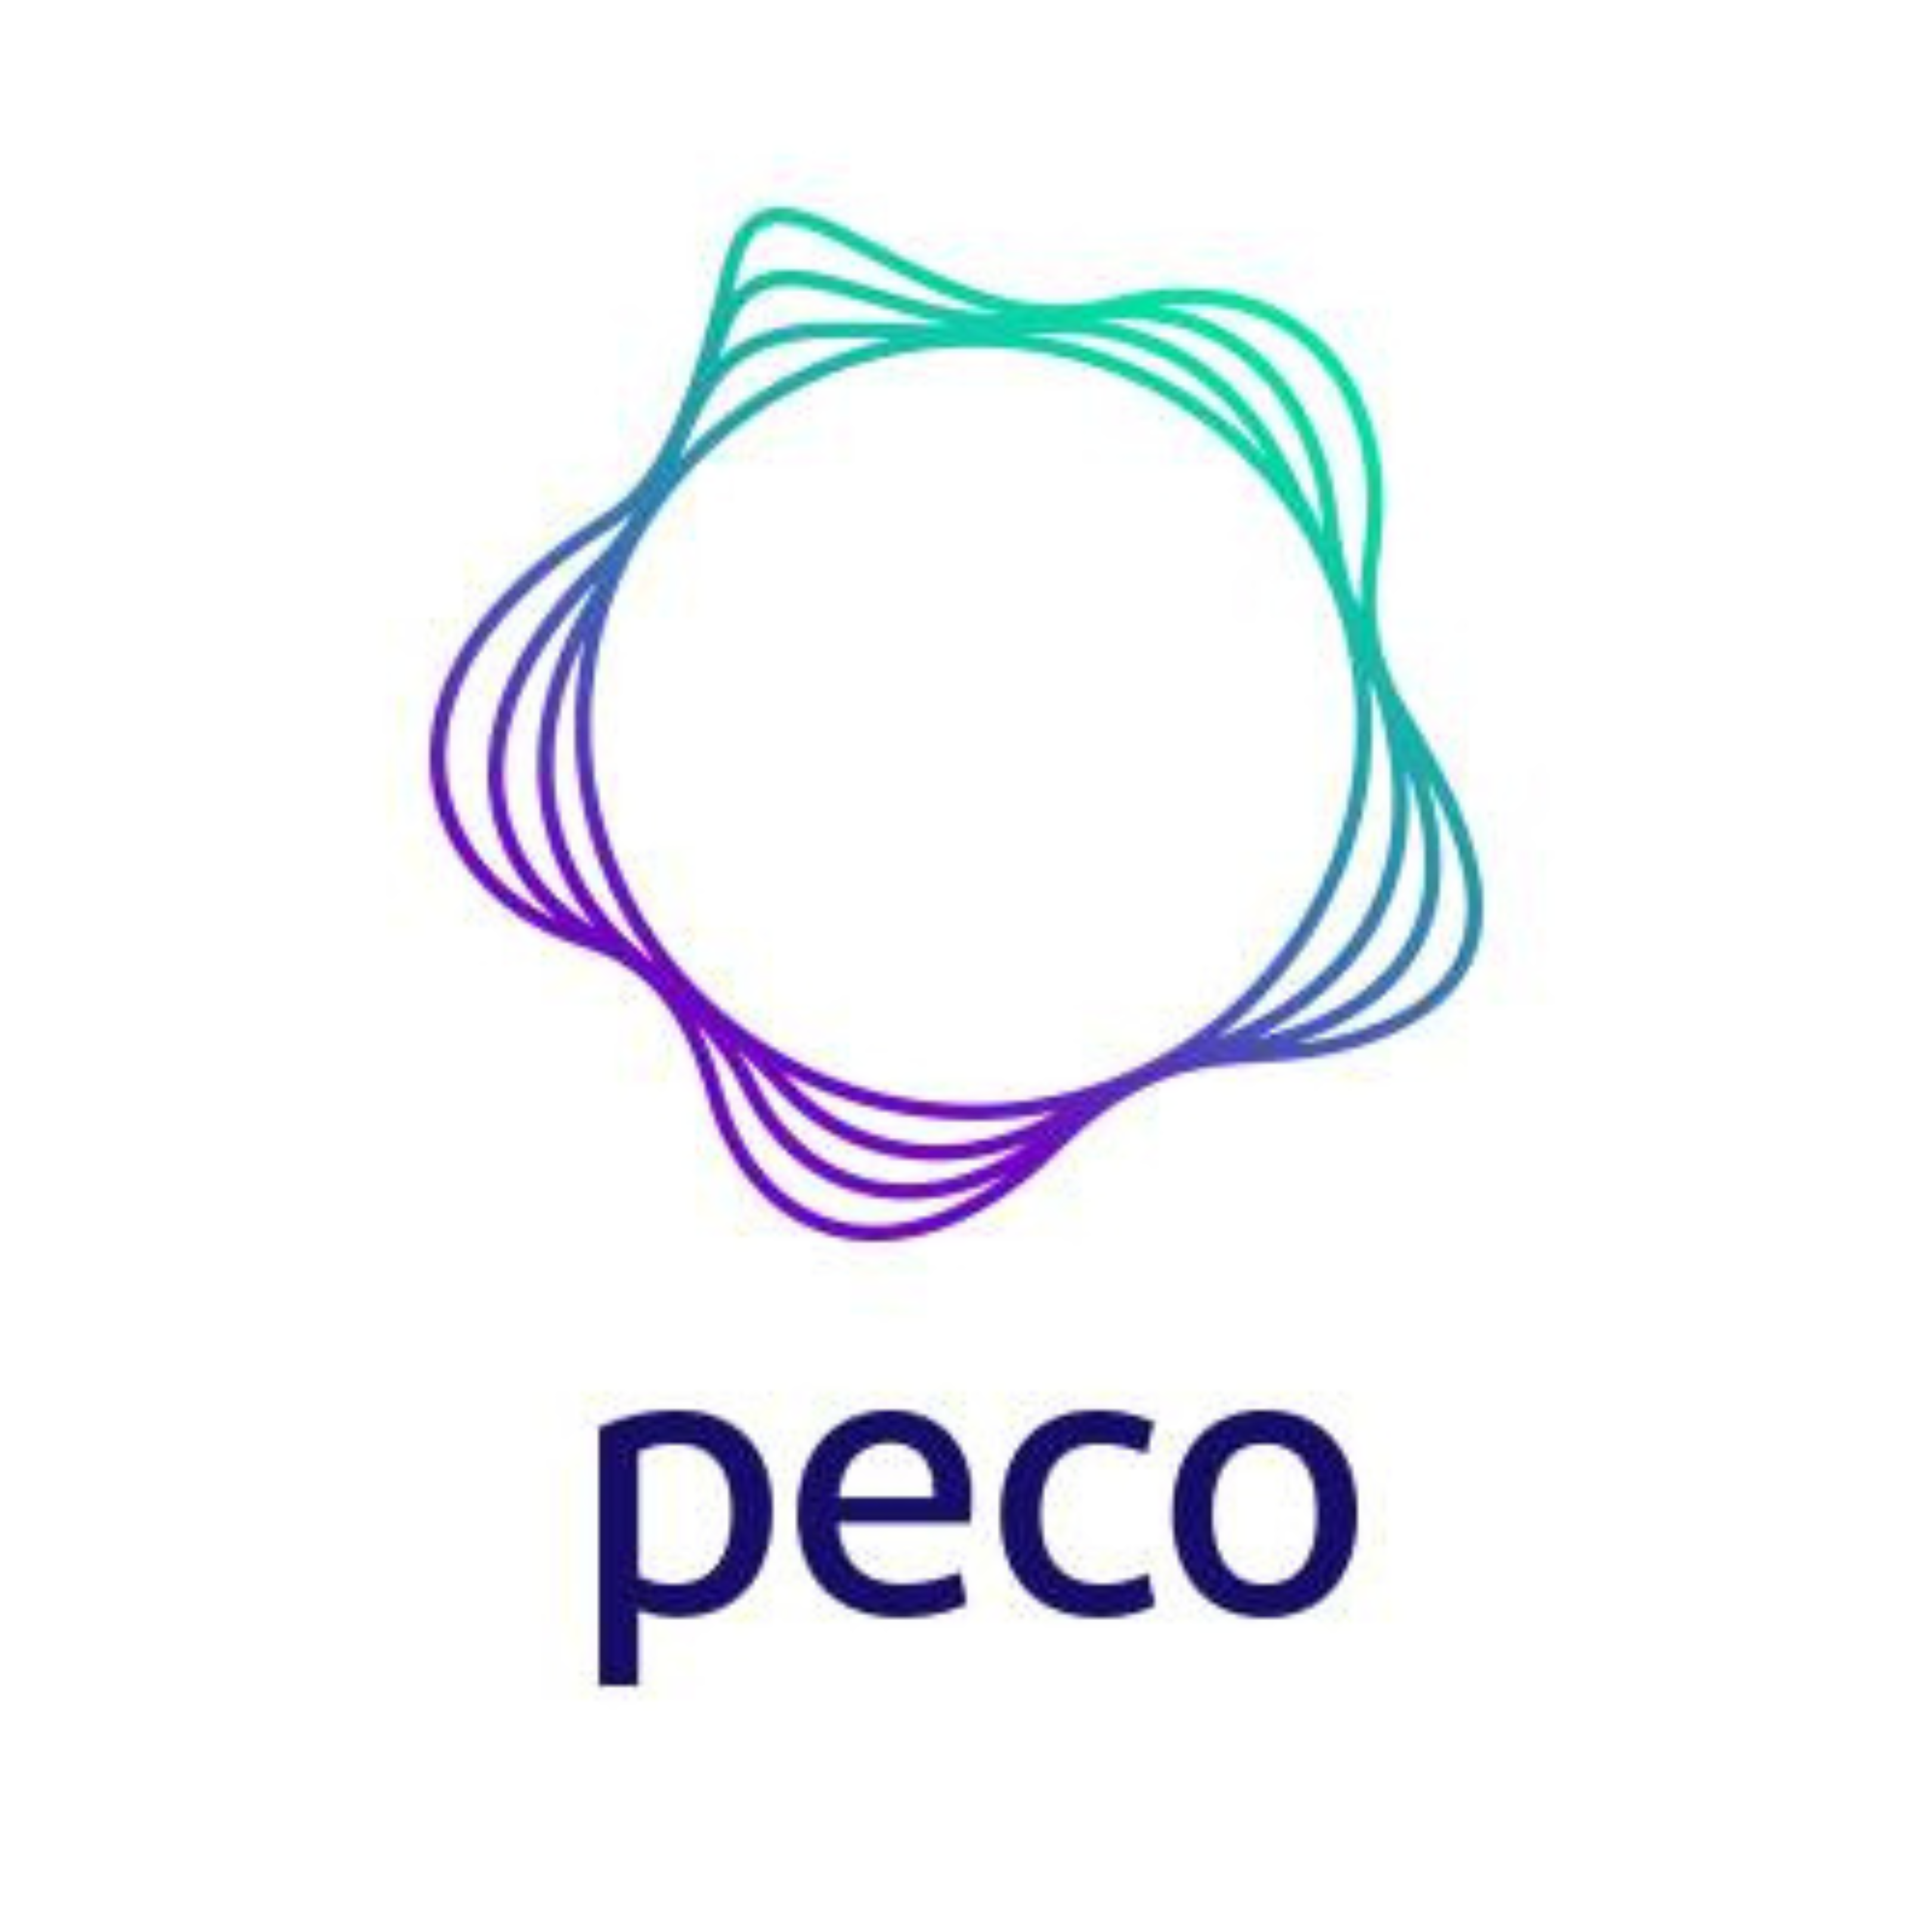 PECO Awards 23 Area Municipalities and Nonprofits with a Total of $150,000 in PECO Green Region Open Space Program Grants